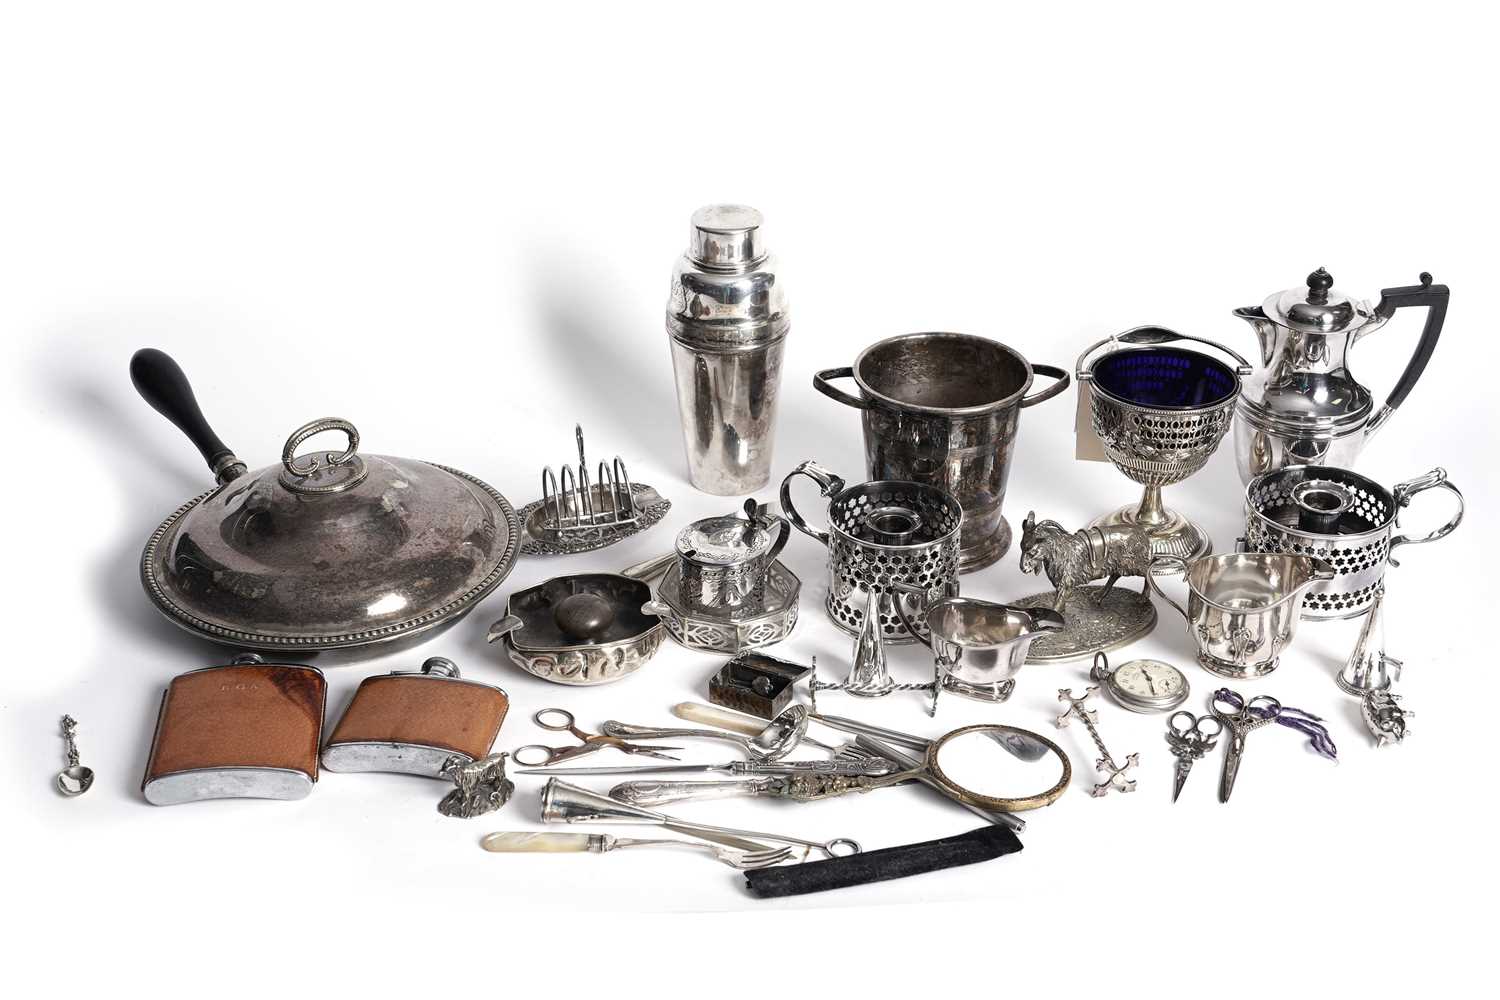 An Ingersoll 'Defiance' pocket watch and a selection of silver plated and white metal wares